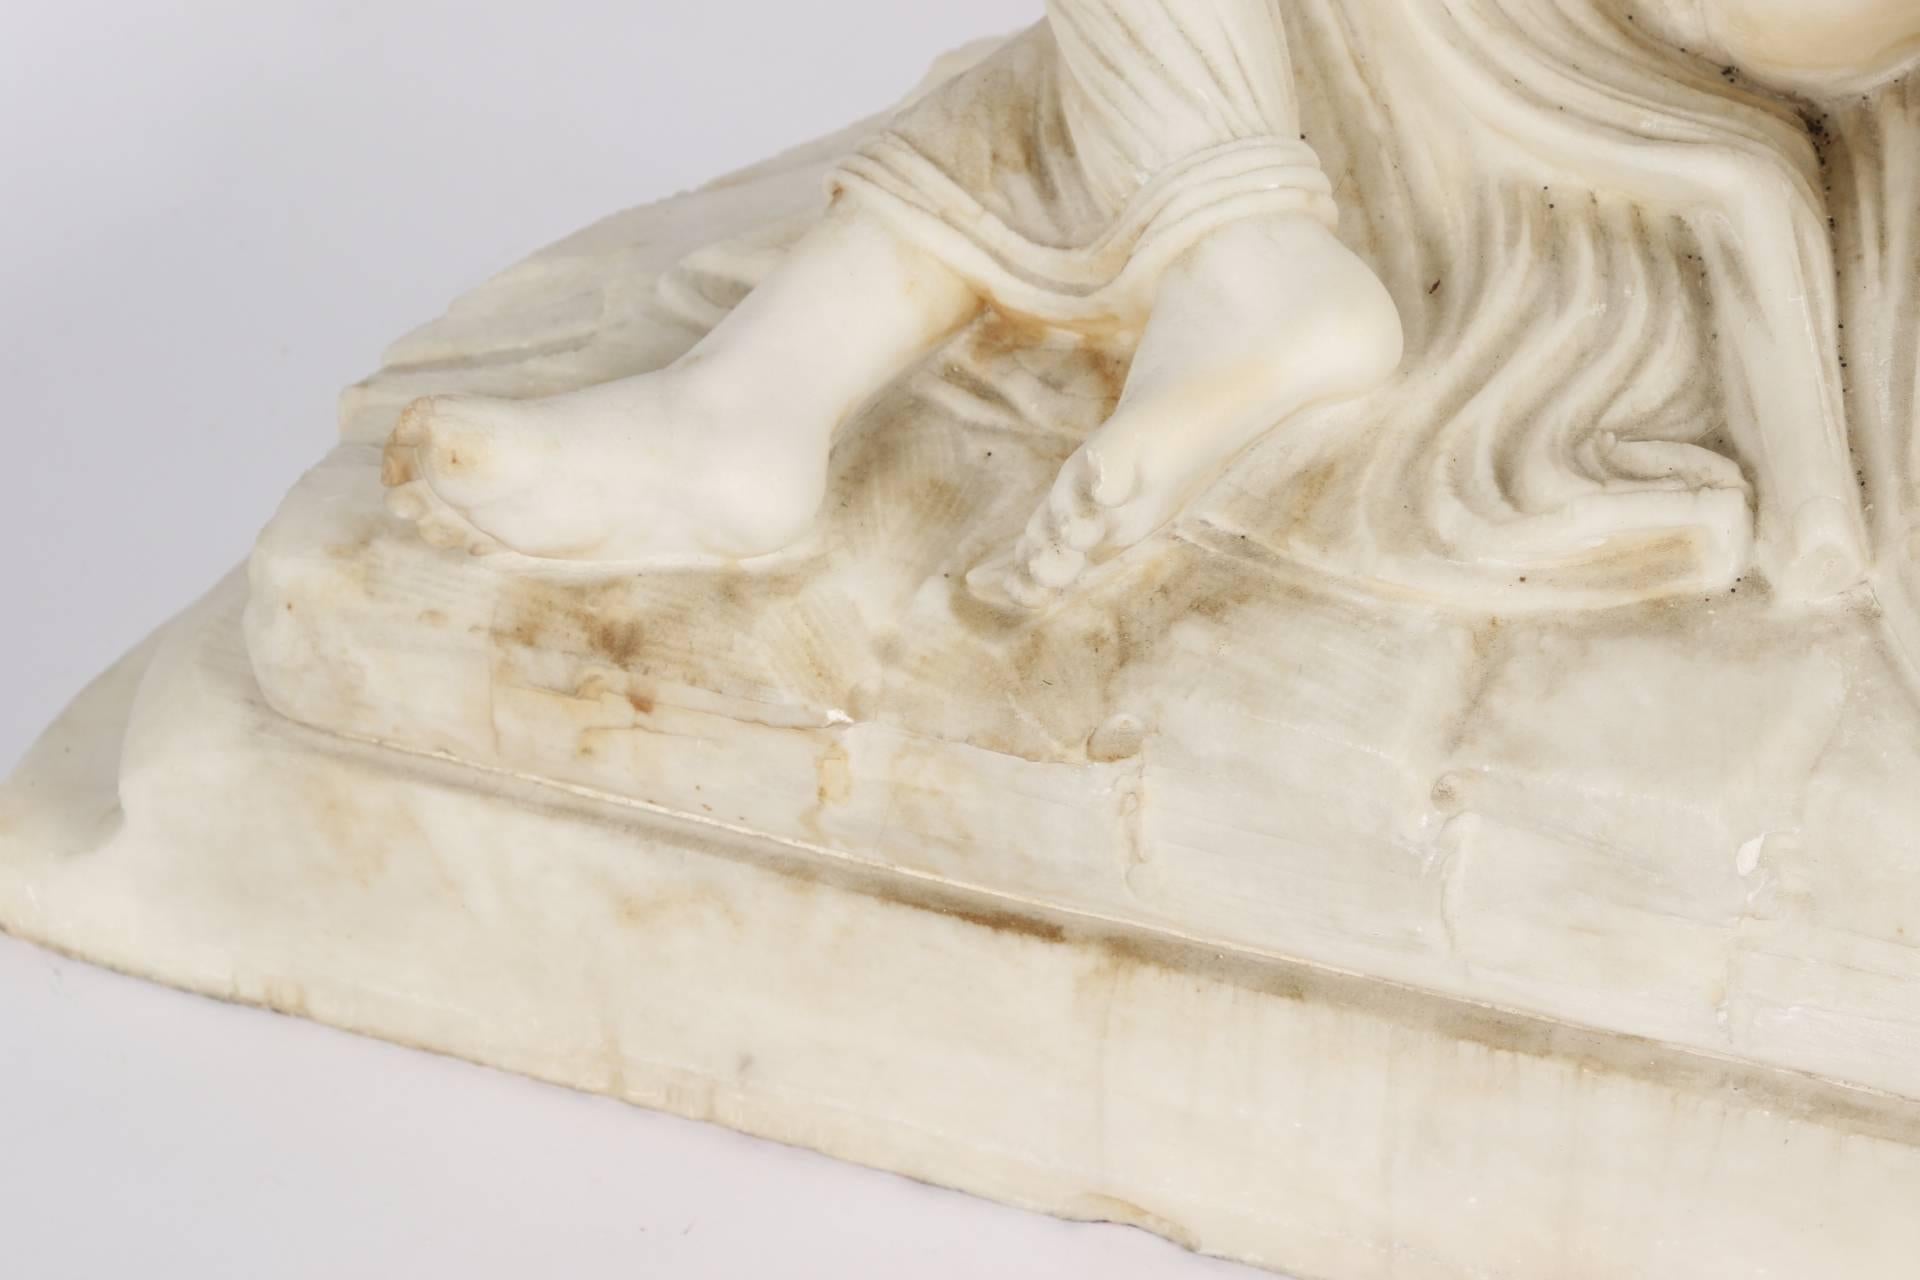 A female semi-nude figure with long flowing hair reclining on a drapery covered demilune base, with a nude male figure standing over her in an embrace. Mounted on a demilune grey and white marble base. The male figure with two notches on is upper